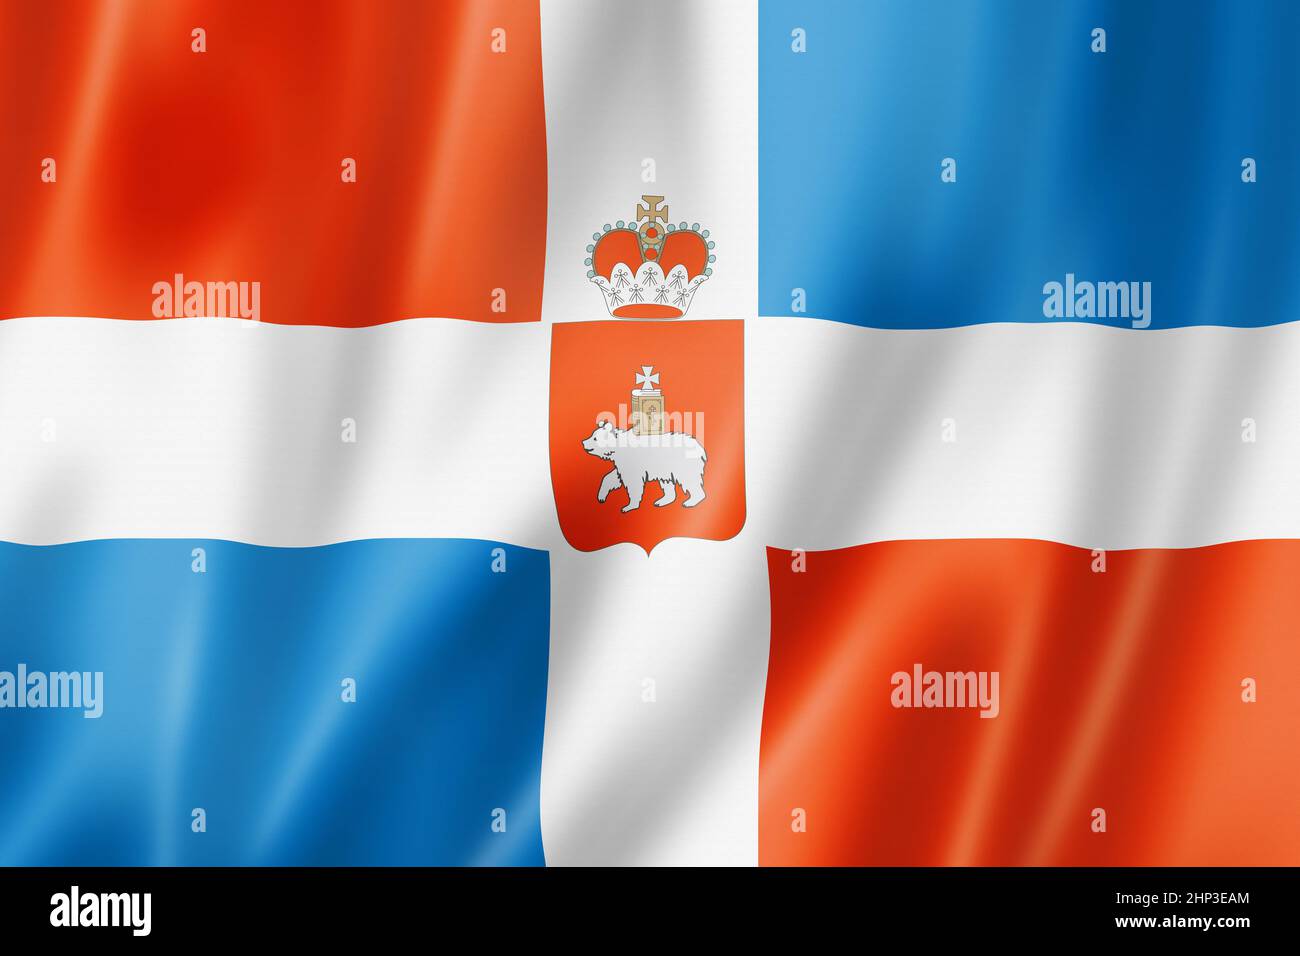 Perm state - Krai -  flag, Russia waving banner collection. 3D illustration Stock Photo